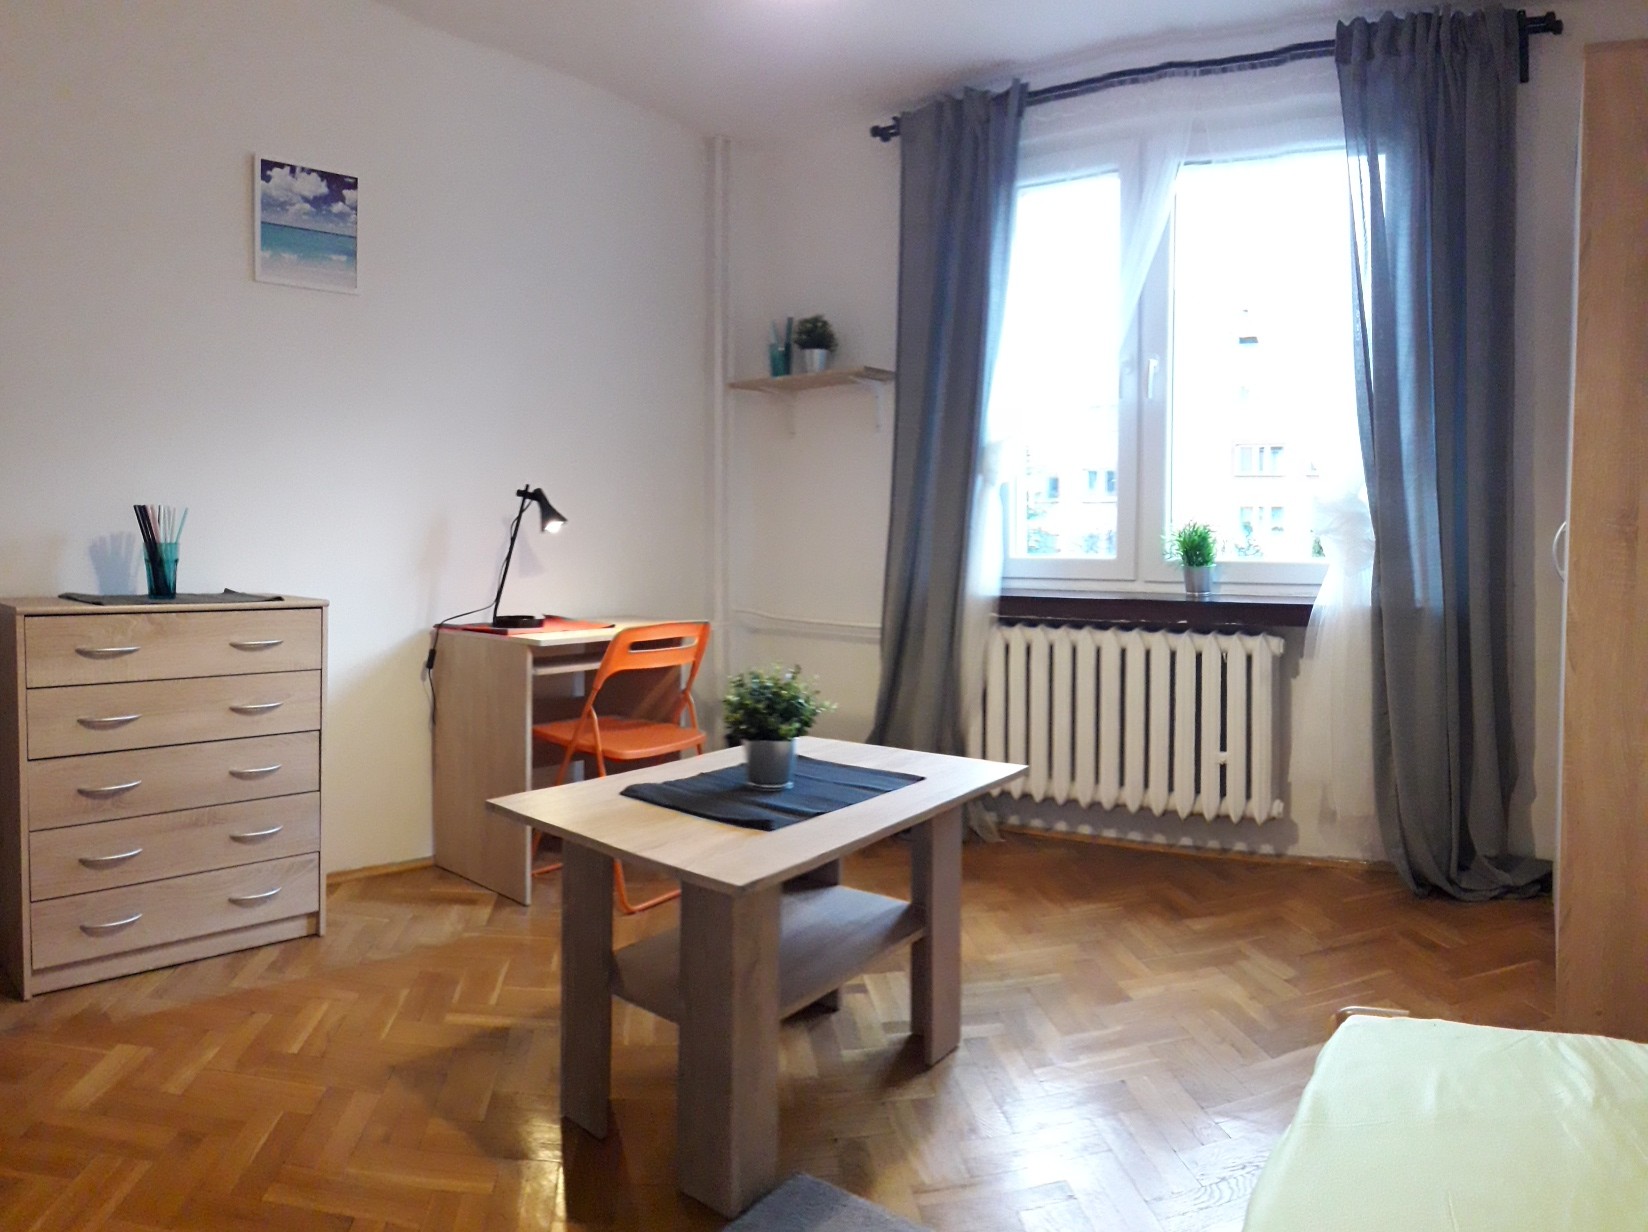 Single Bed Rooms For Rent In 4 Bedroom Apartment In Podgorze